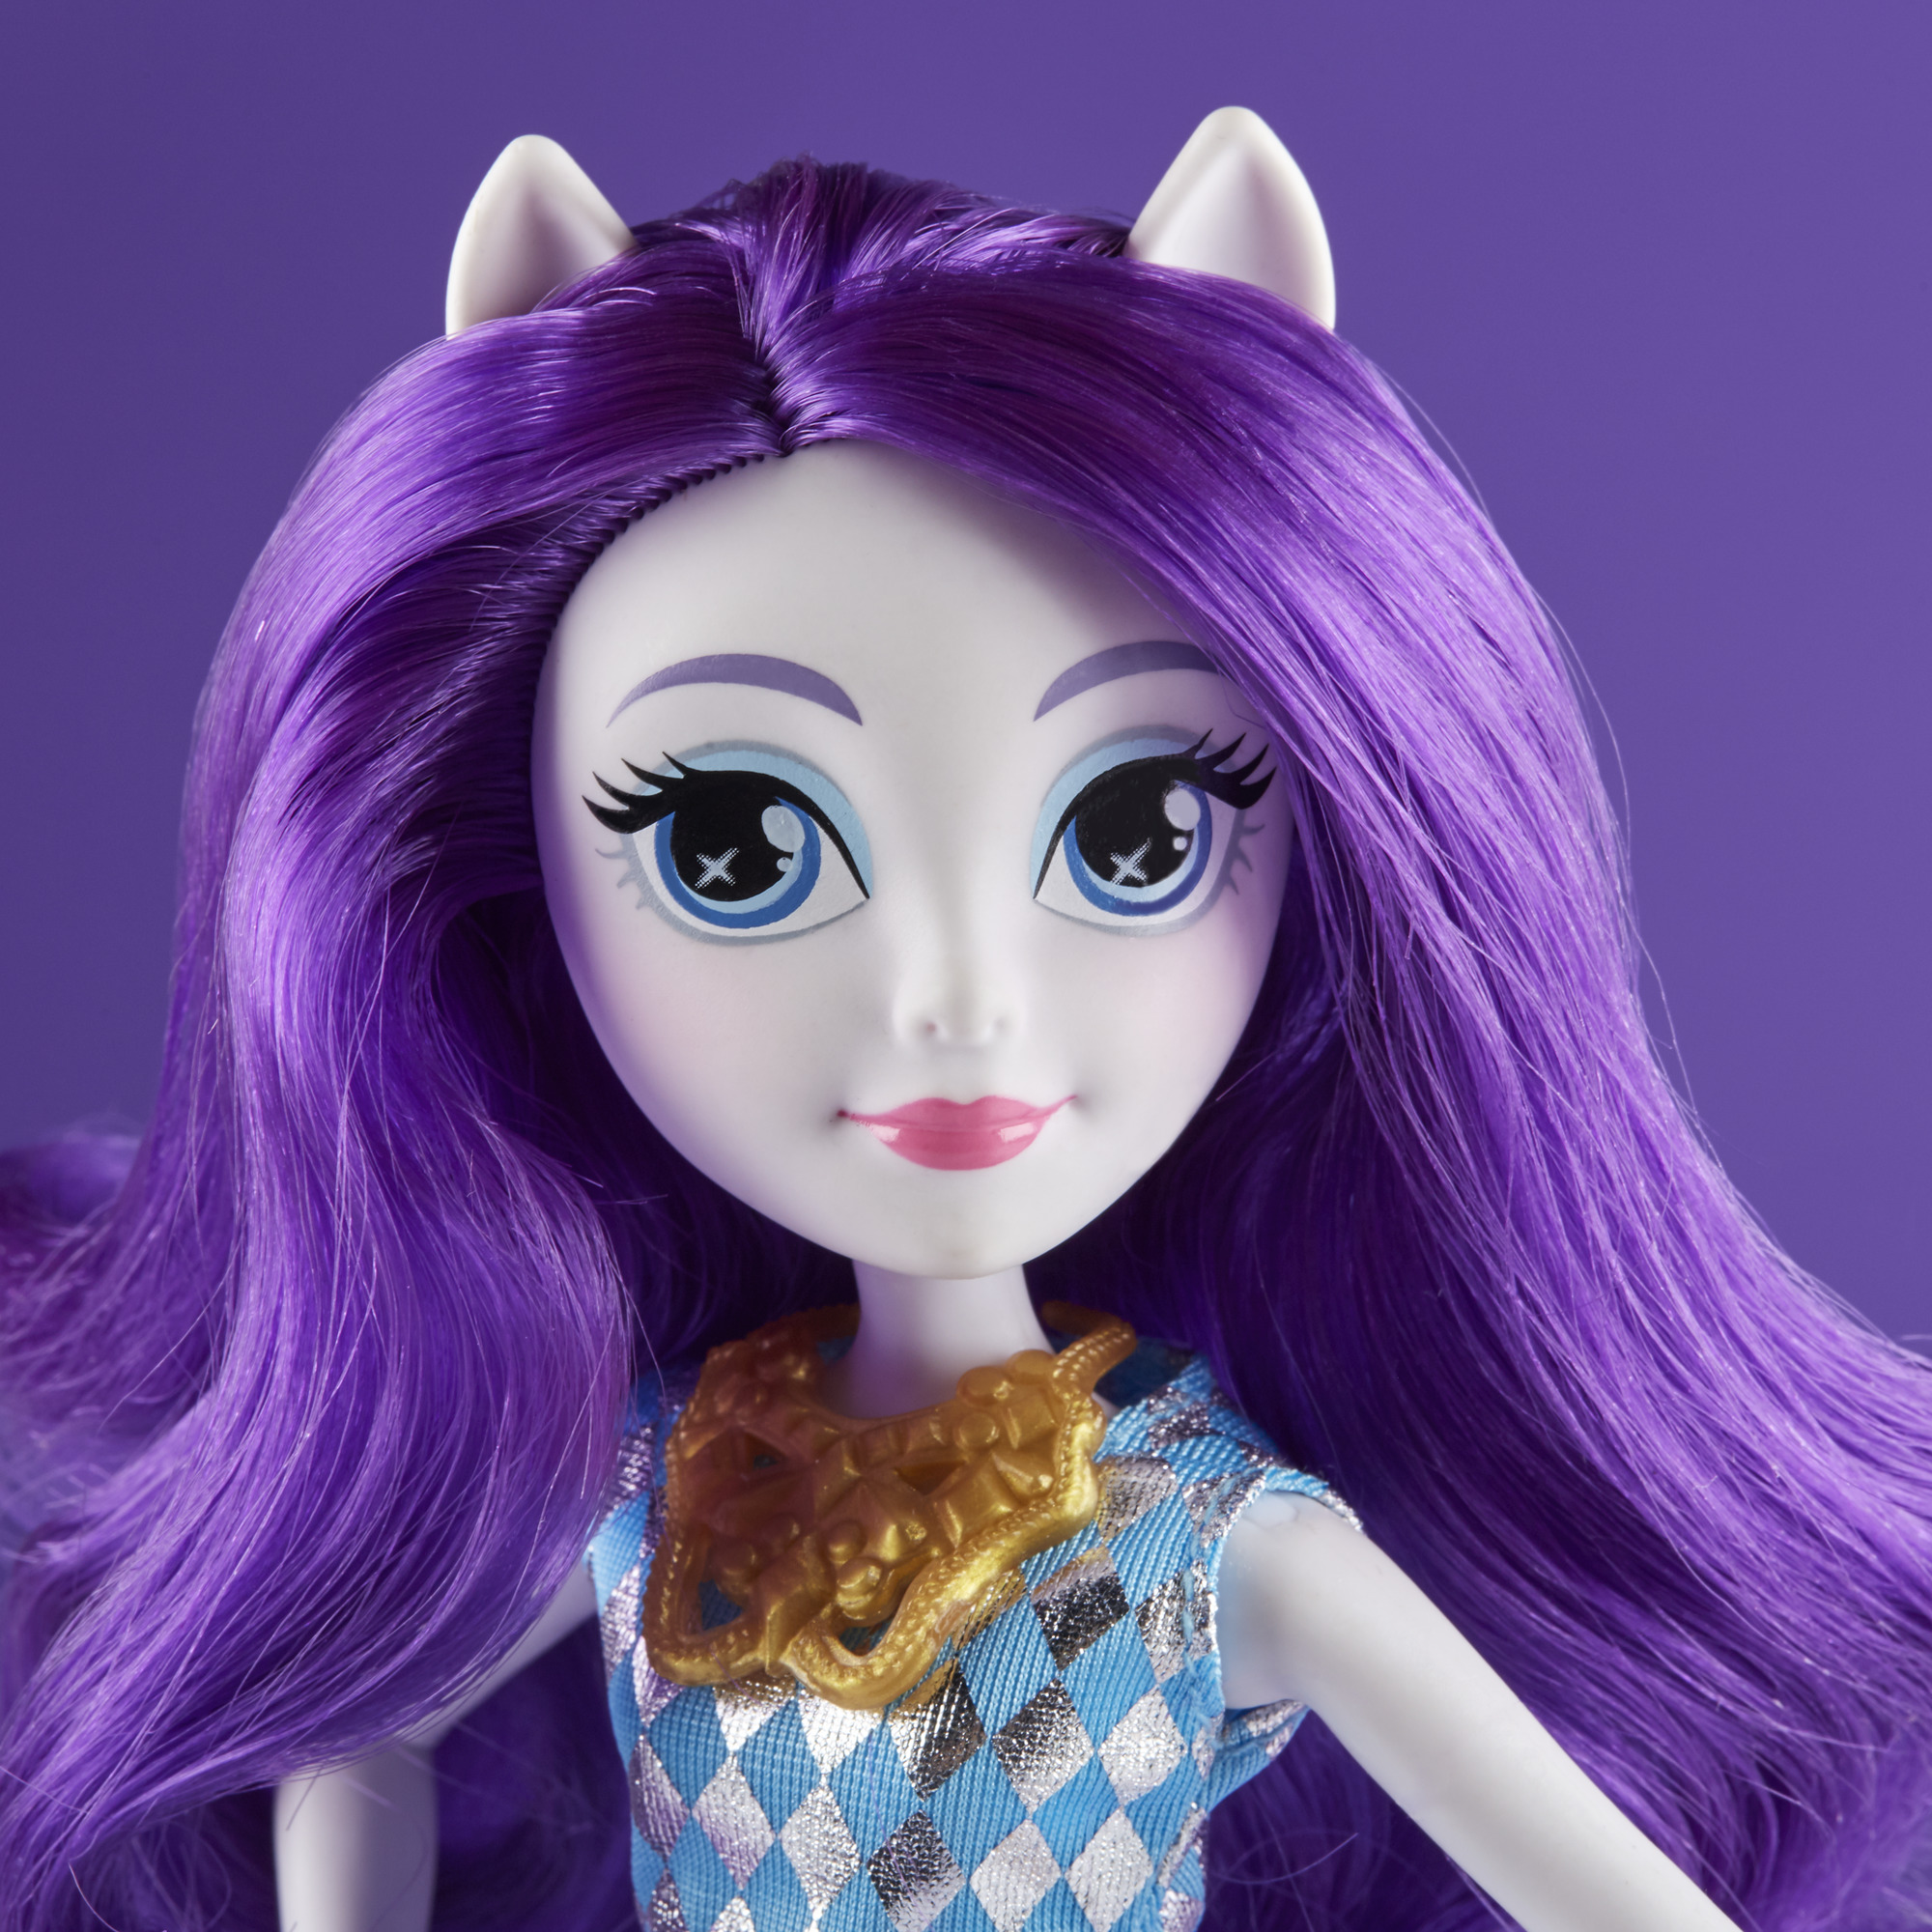 My Little Pony Equestria Girls Rarity Classic Style Doll - image 8 of 9